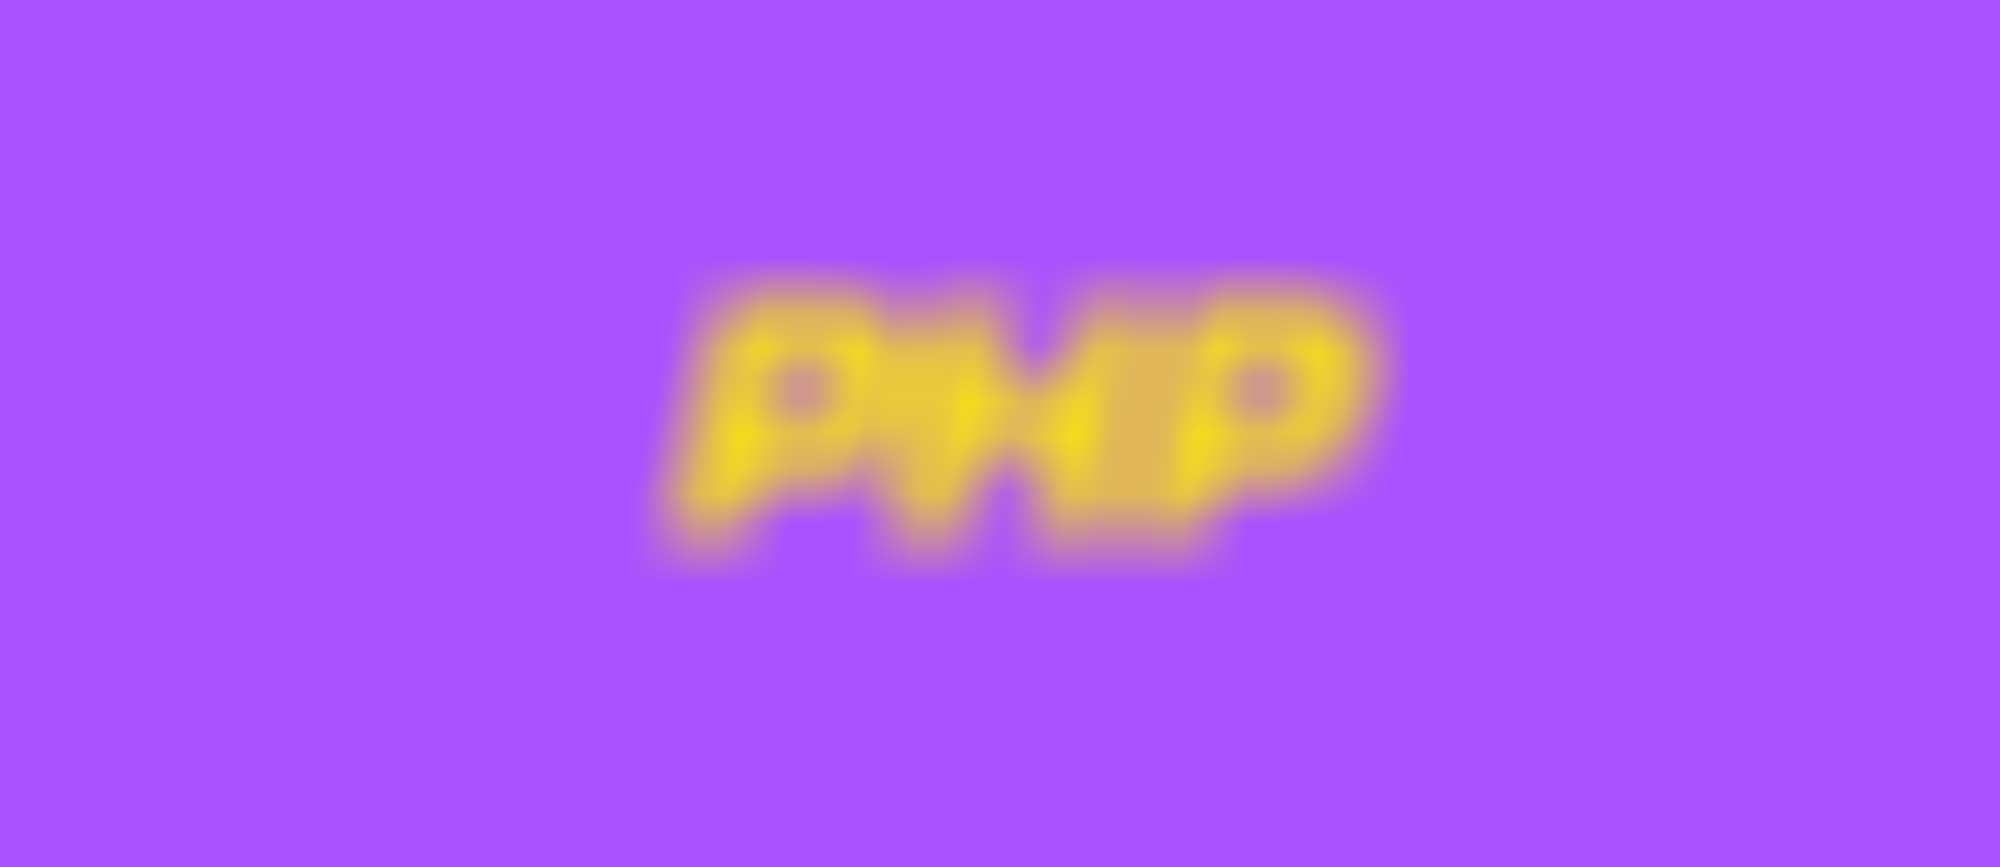 Advanced PHP Simplified